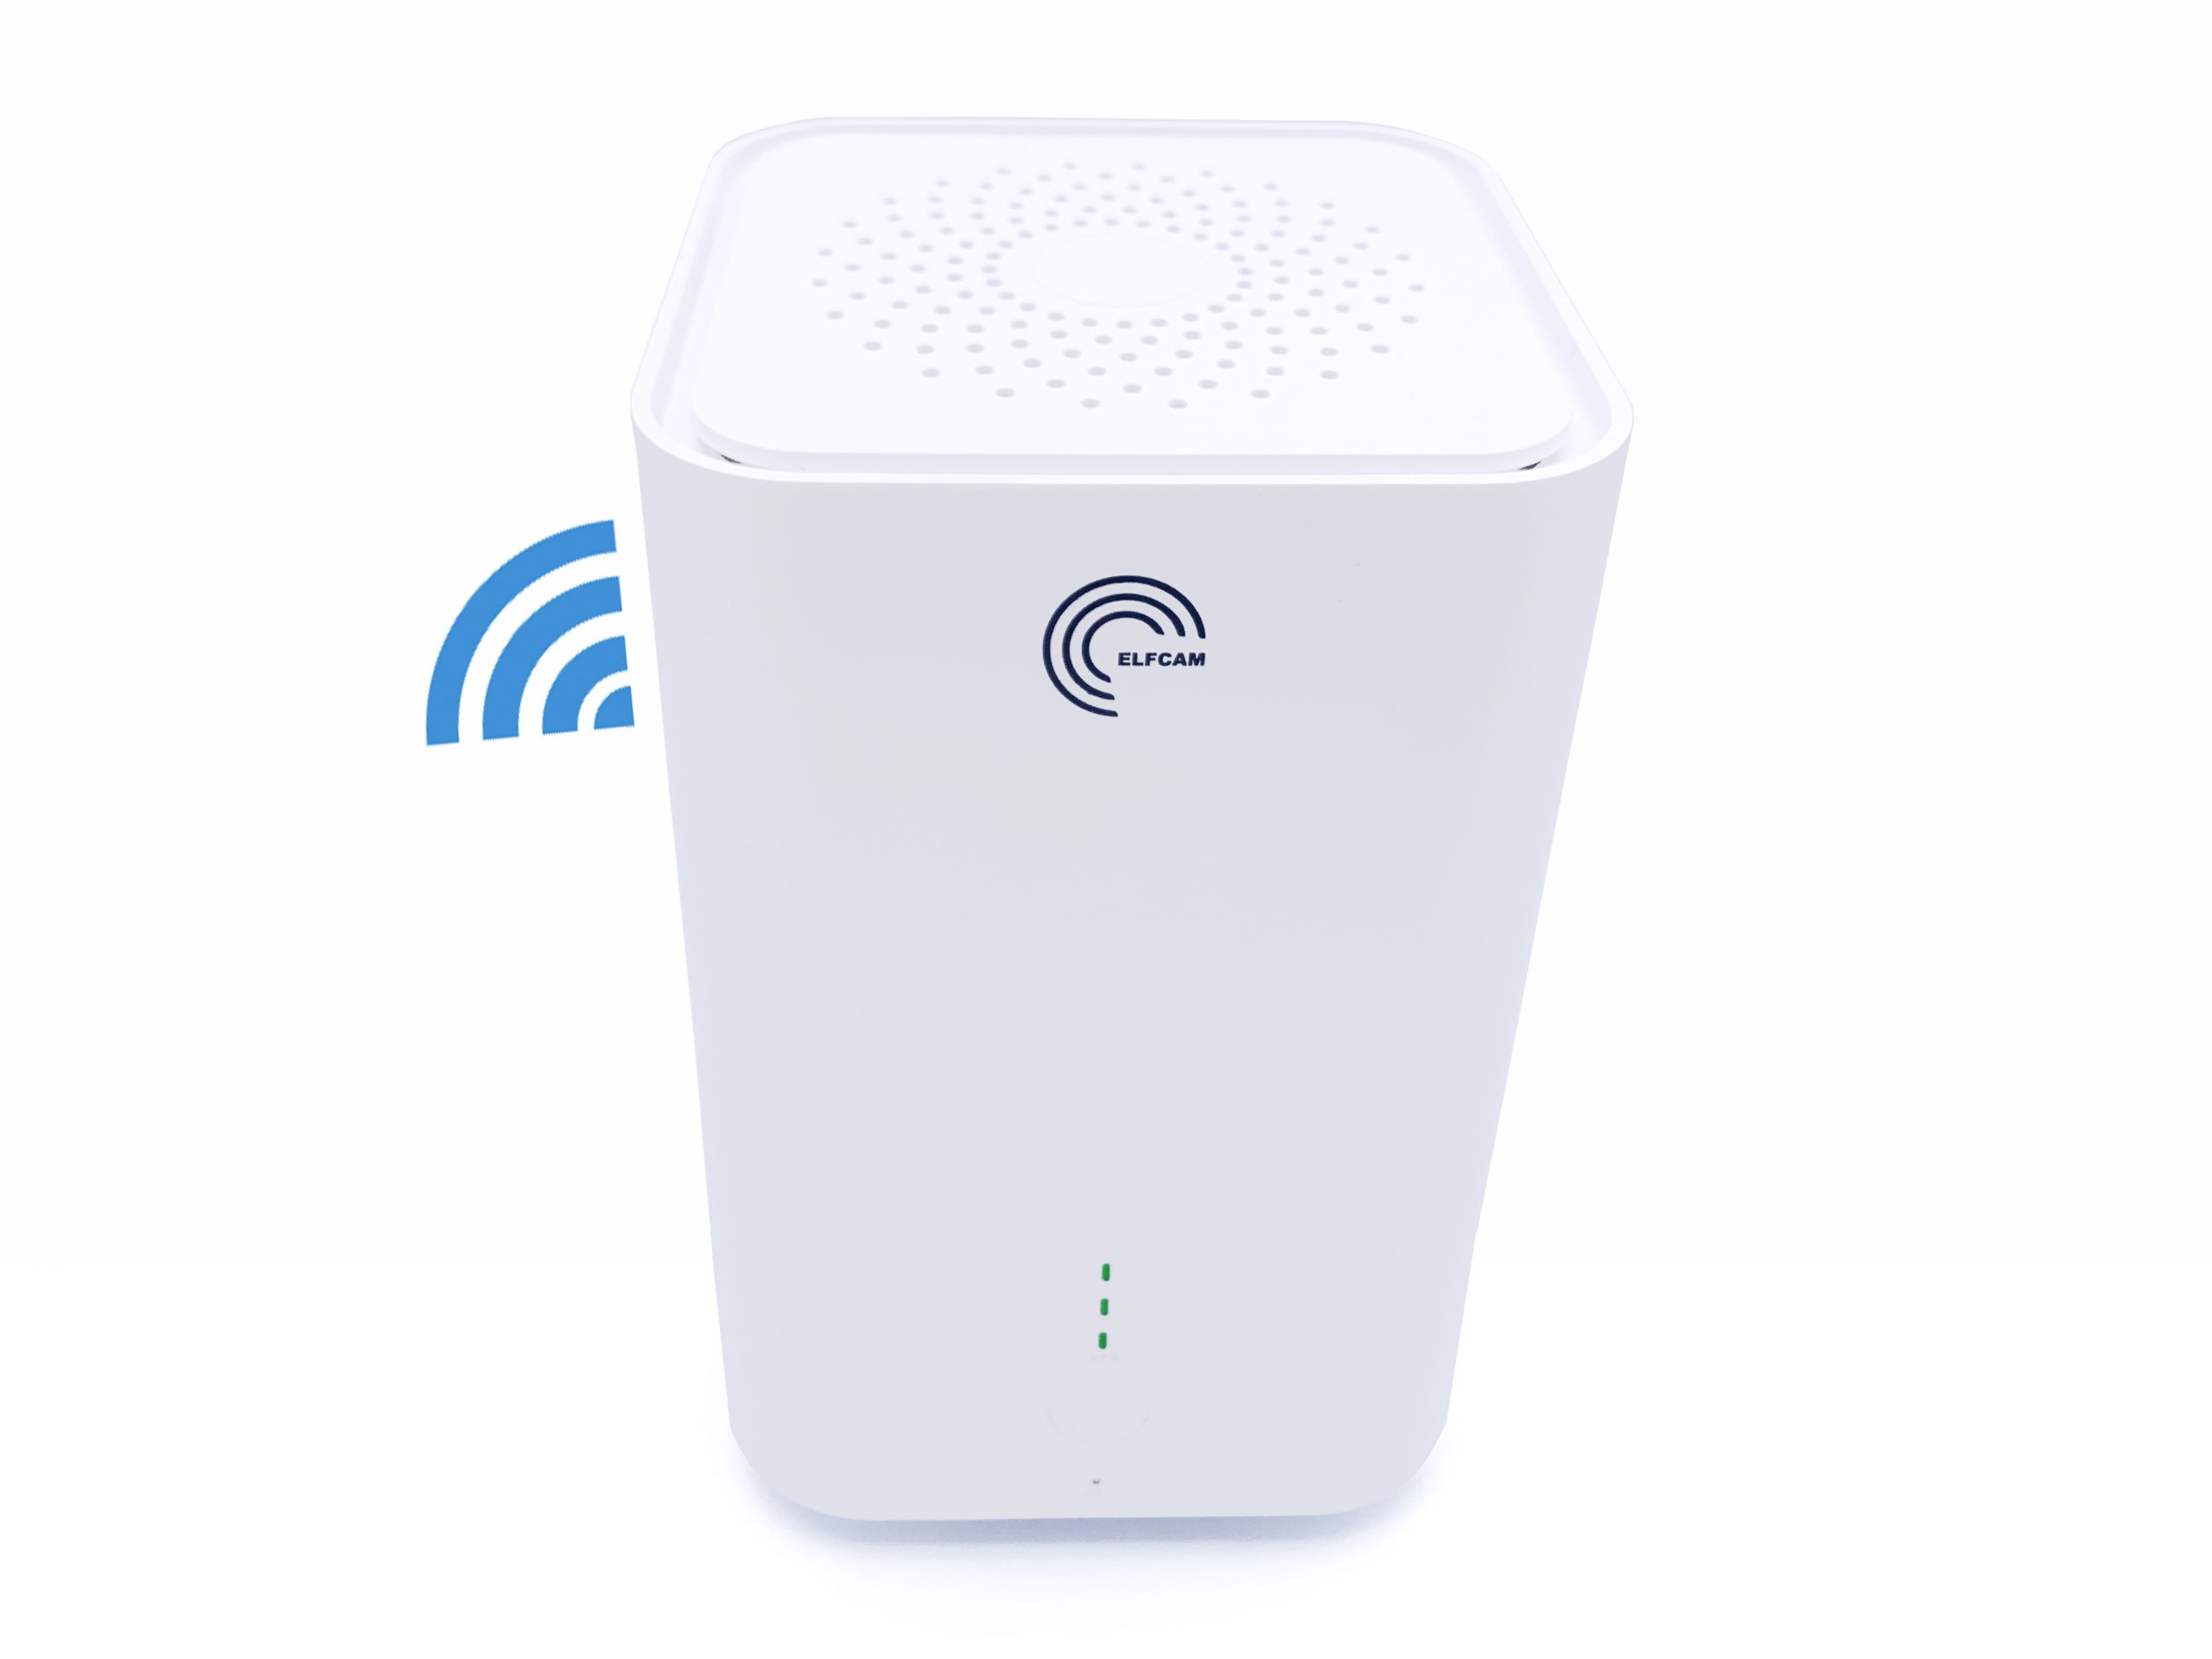 Mesh WiFi 5 System, Dual-Band WiFi 5 Mesh Router for the Whole Home, Up to  867 Mbit/s (Ref:5885) – Elfcam - Fiber Solution Specialist